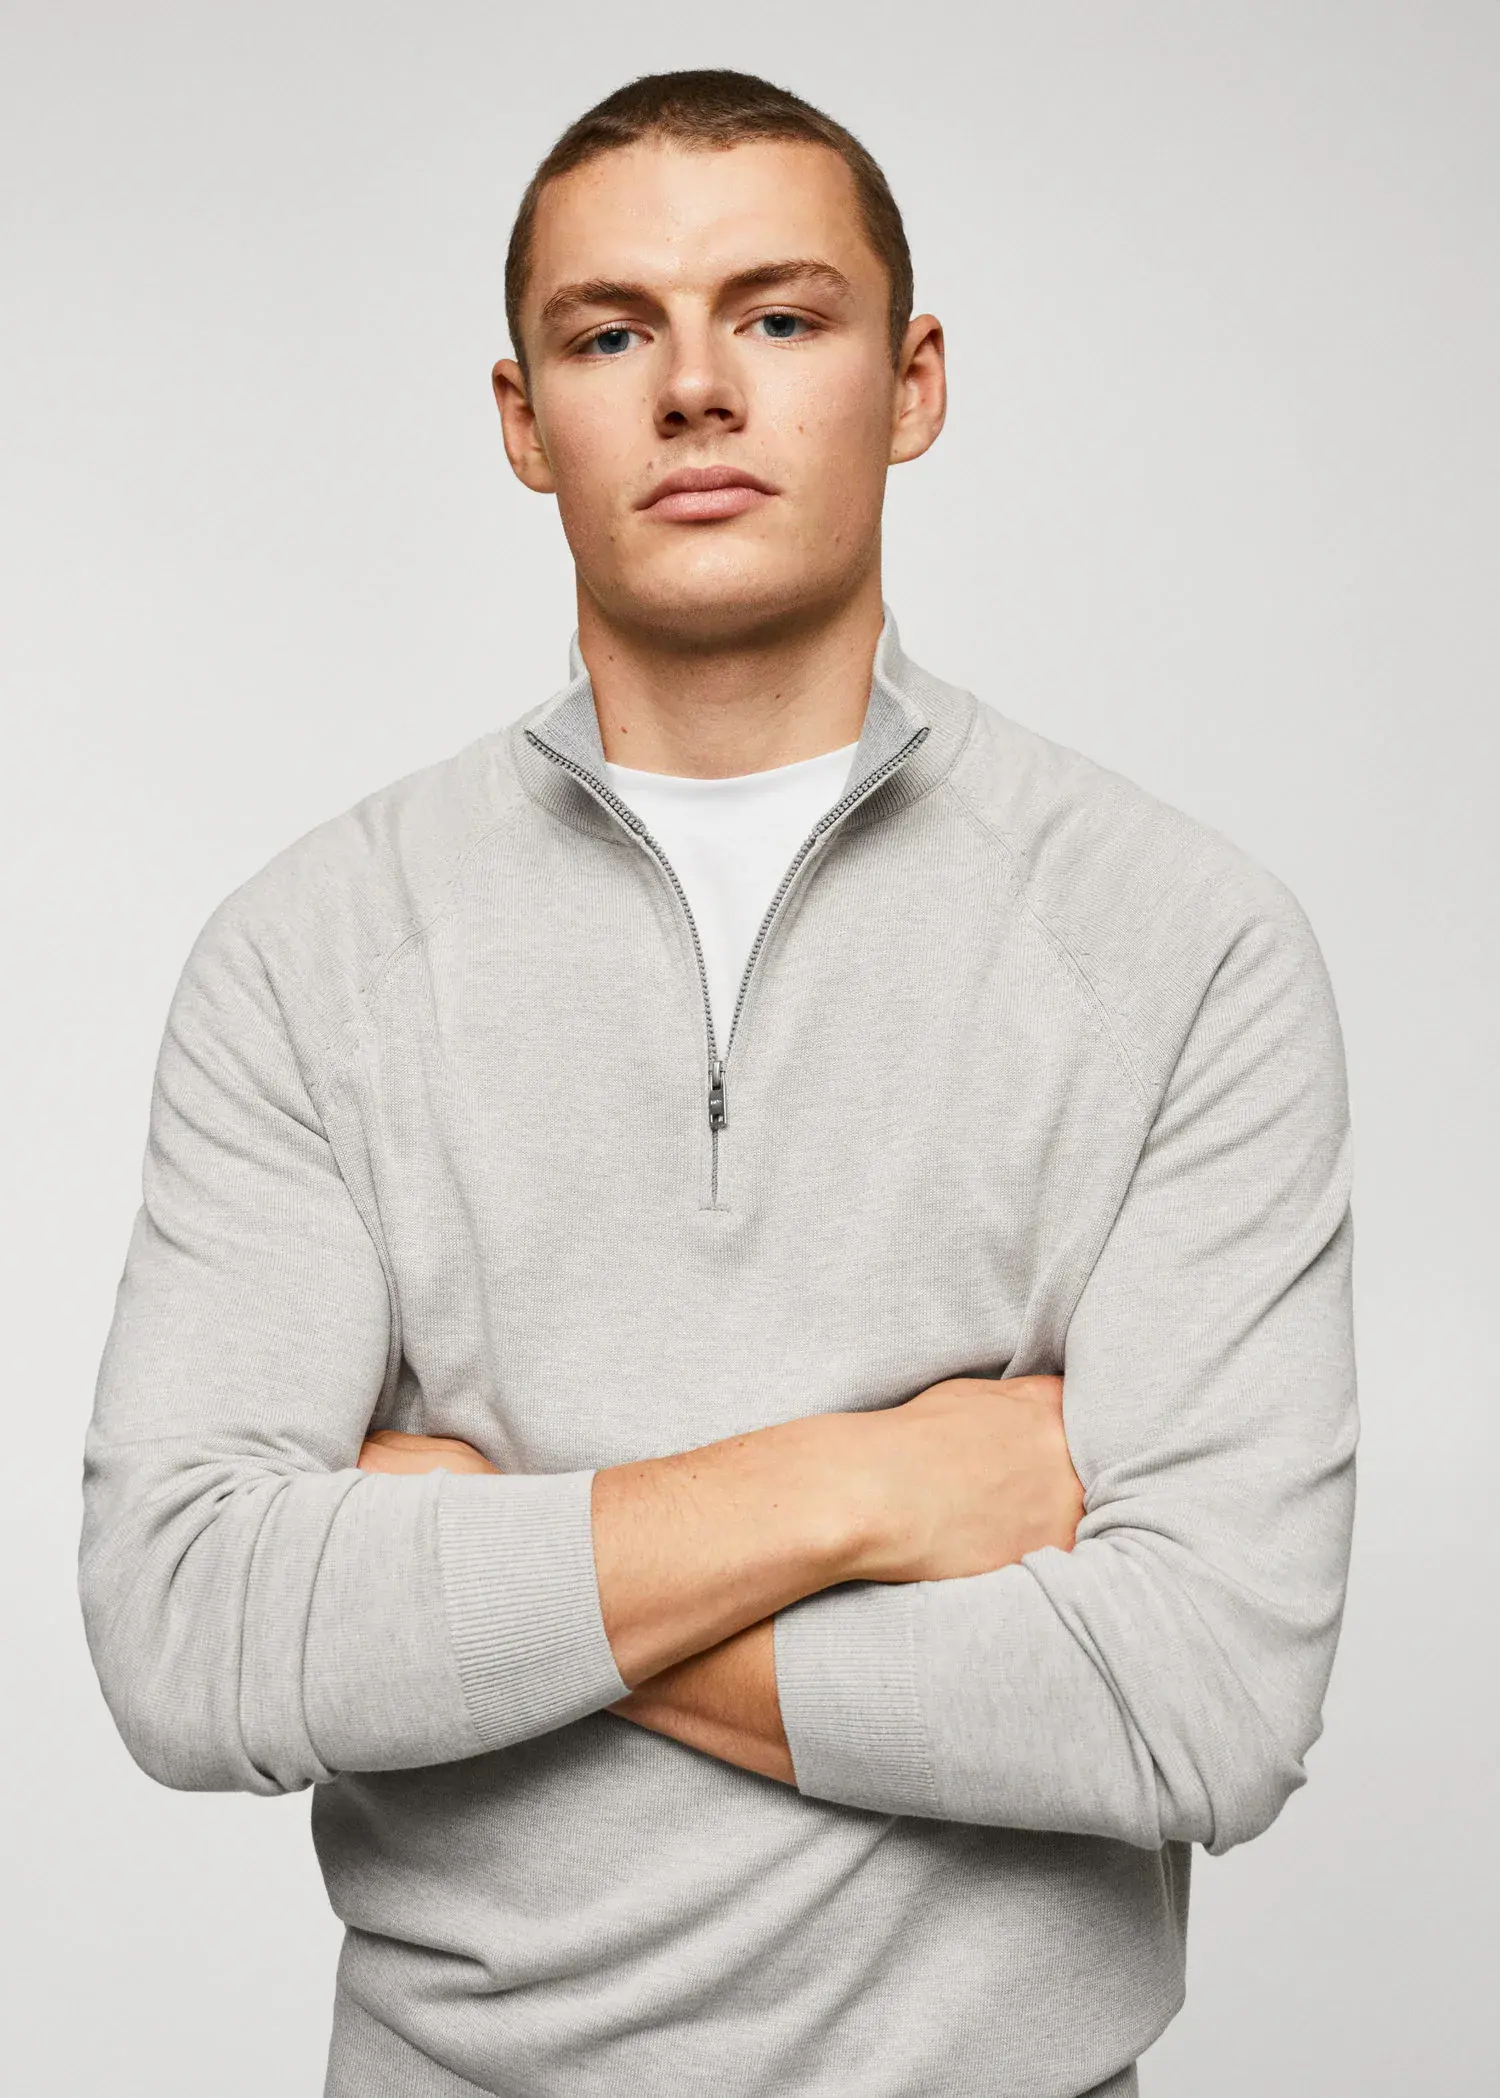 Mango Cotton sweater with neck zipper. a man with his arms crossed wearing a white shirt. 